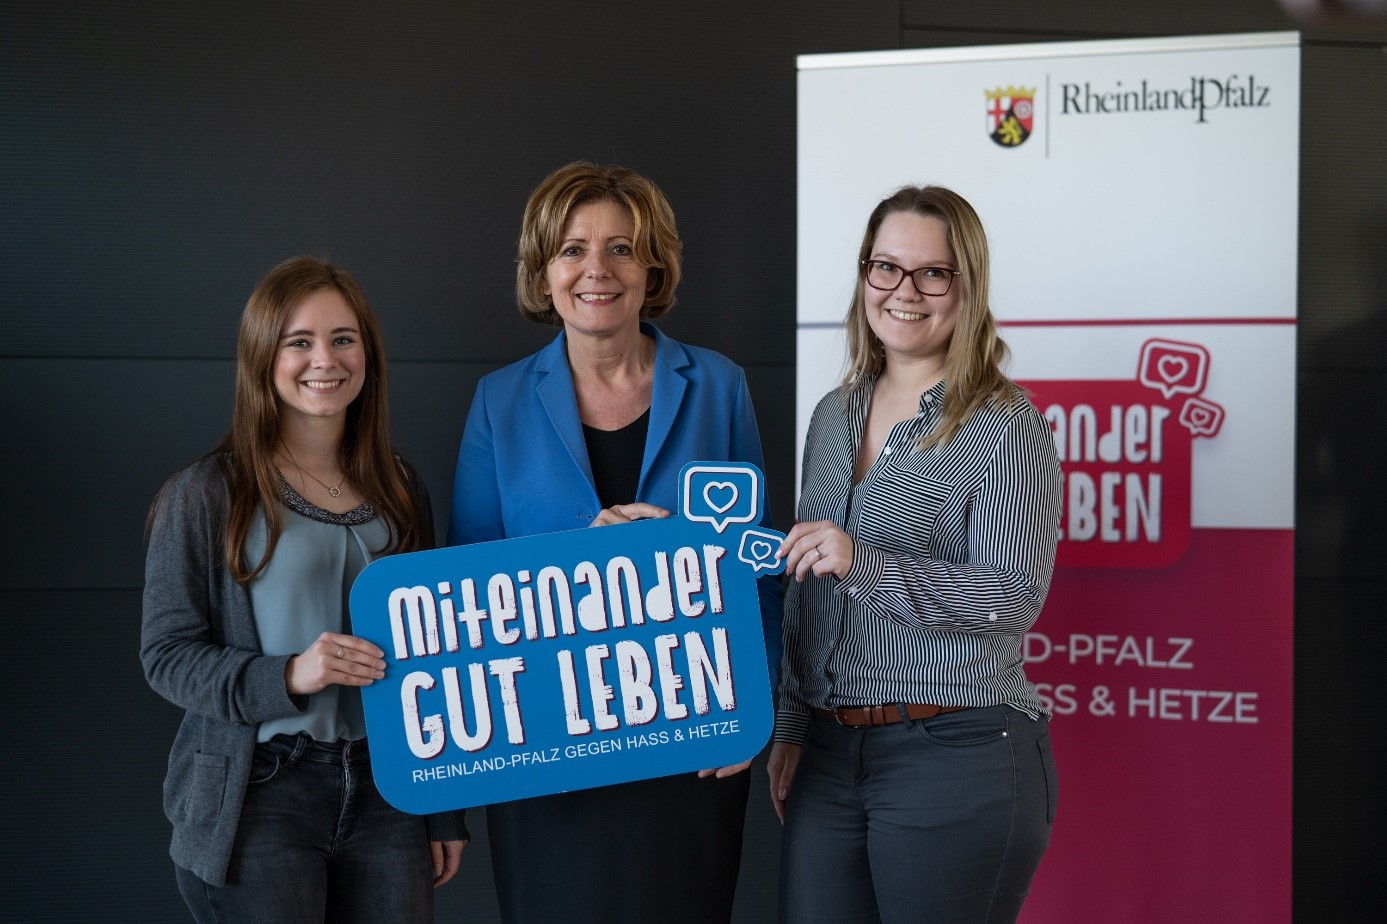 The JAV of HWG LU at the joint photo session with Minister President Malu Dreyer (center) at the JAV Forum on March 3, 2020 in Mainz (Photo: State Chancellery RLP / Dinges)